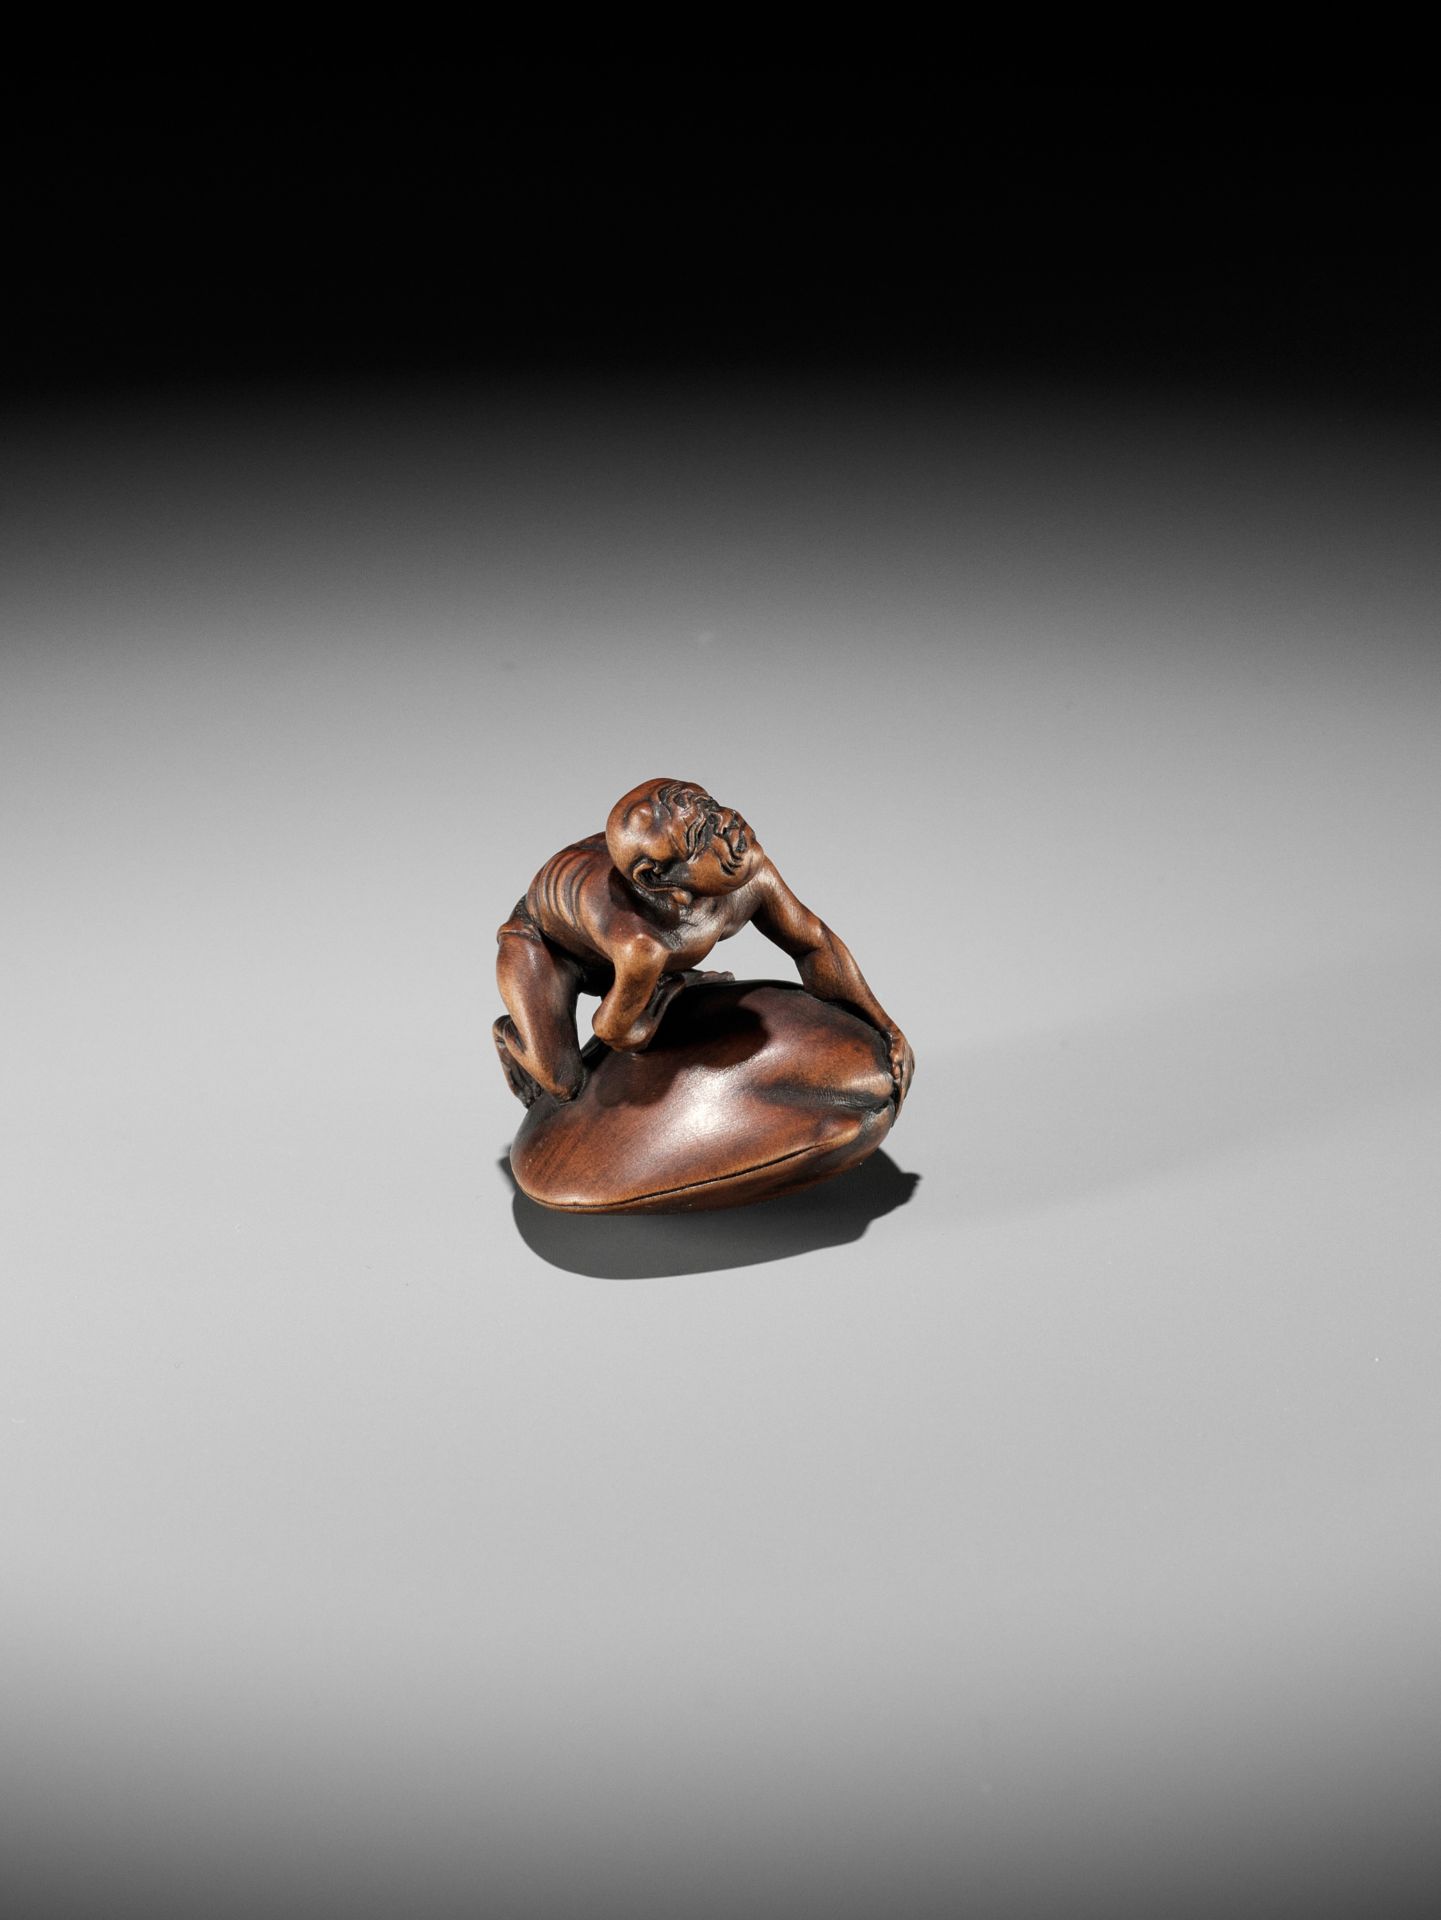 GYOKUZAN: A MASTERFUL MINIATURE WOOD NETSUKE OF A BLINDMAN BEING TRAPPED BY A CLAM - Image 9 of 12